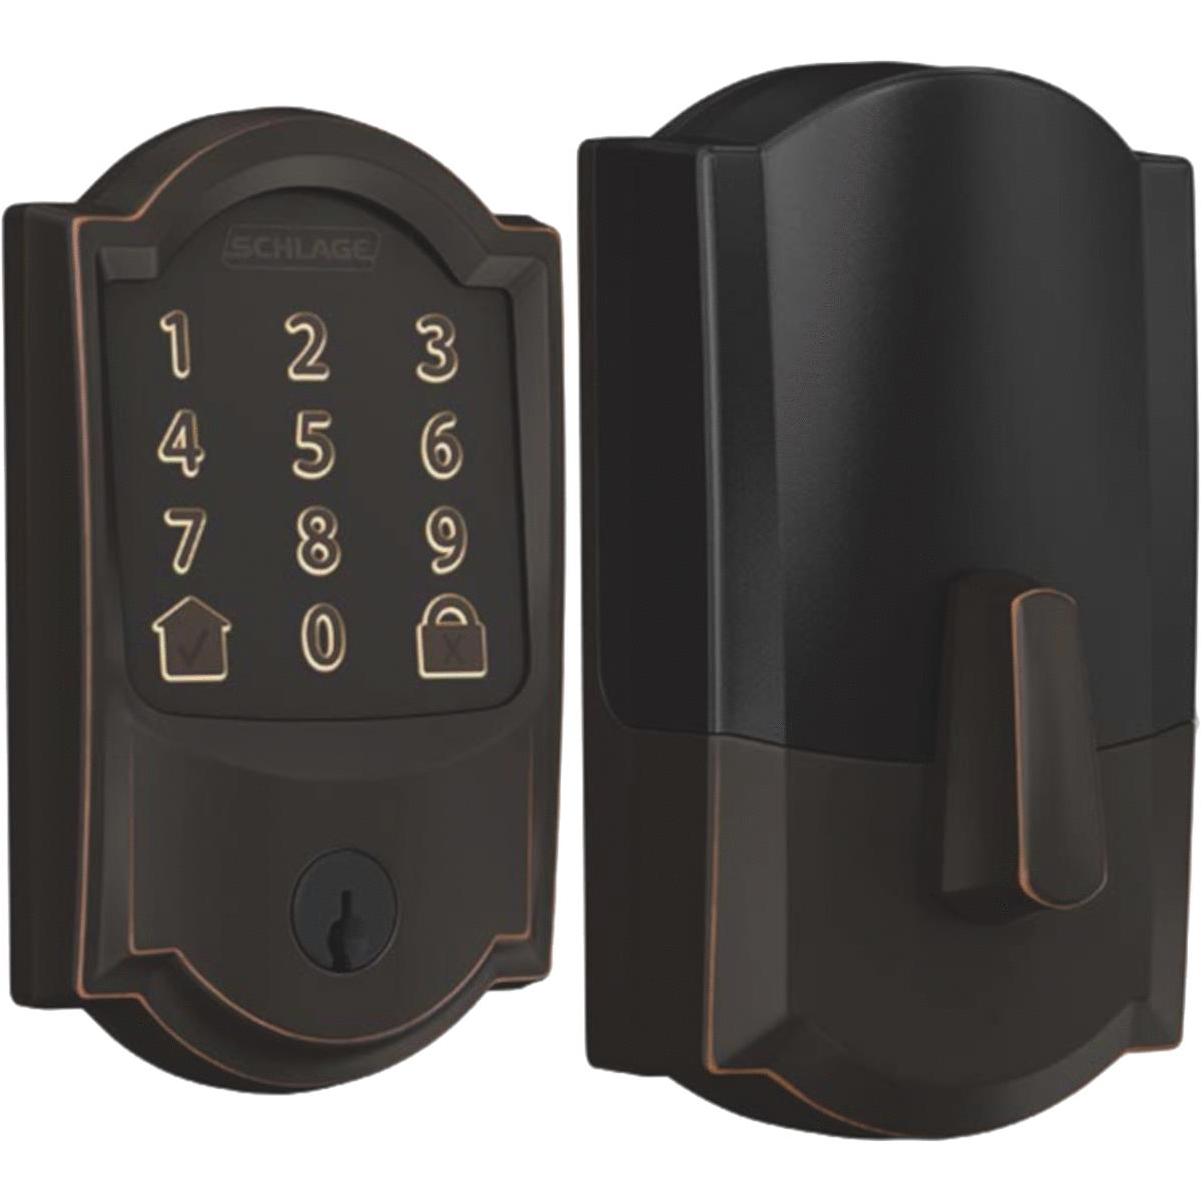 image - Best Smart Locks for a Secure Home - Find Out The Top 5 Picks!